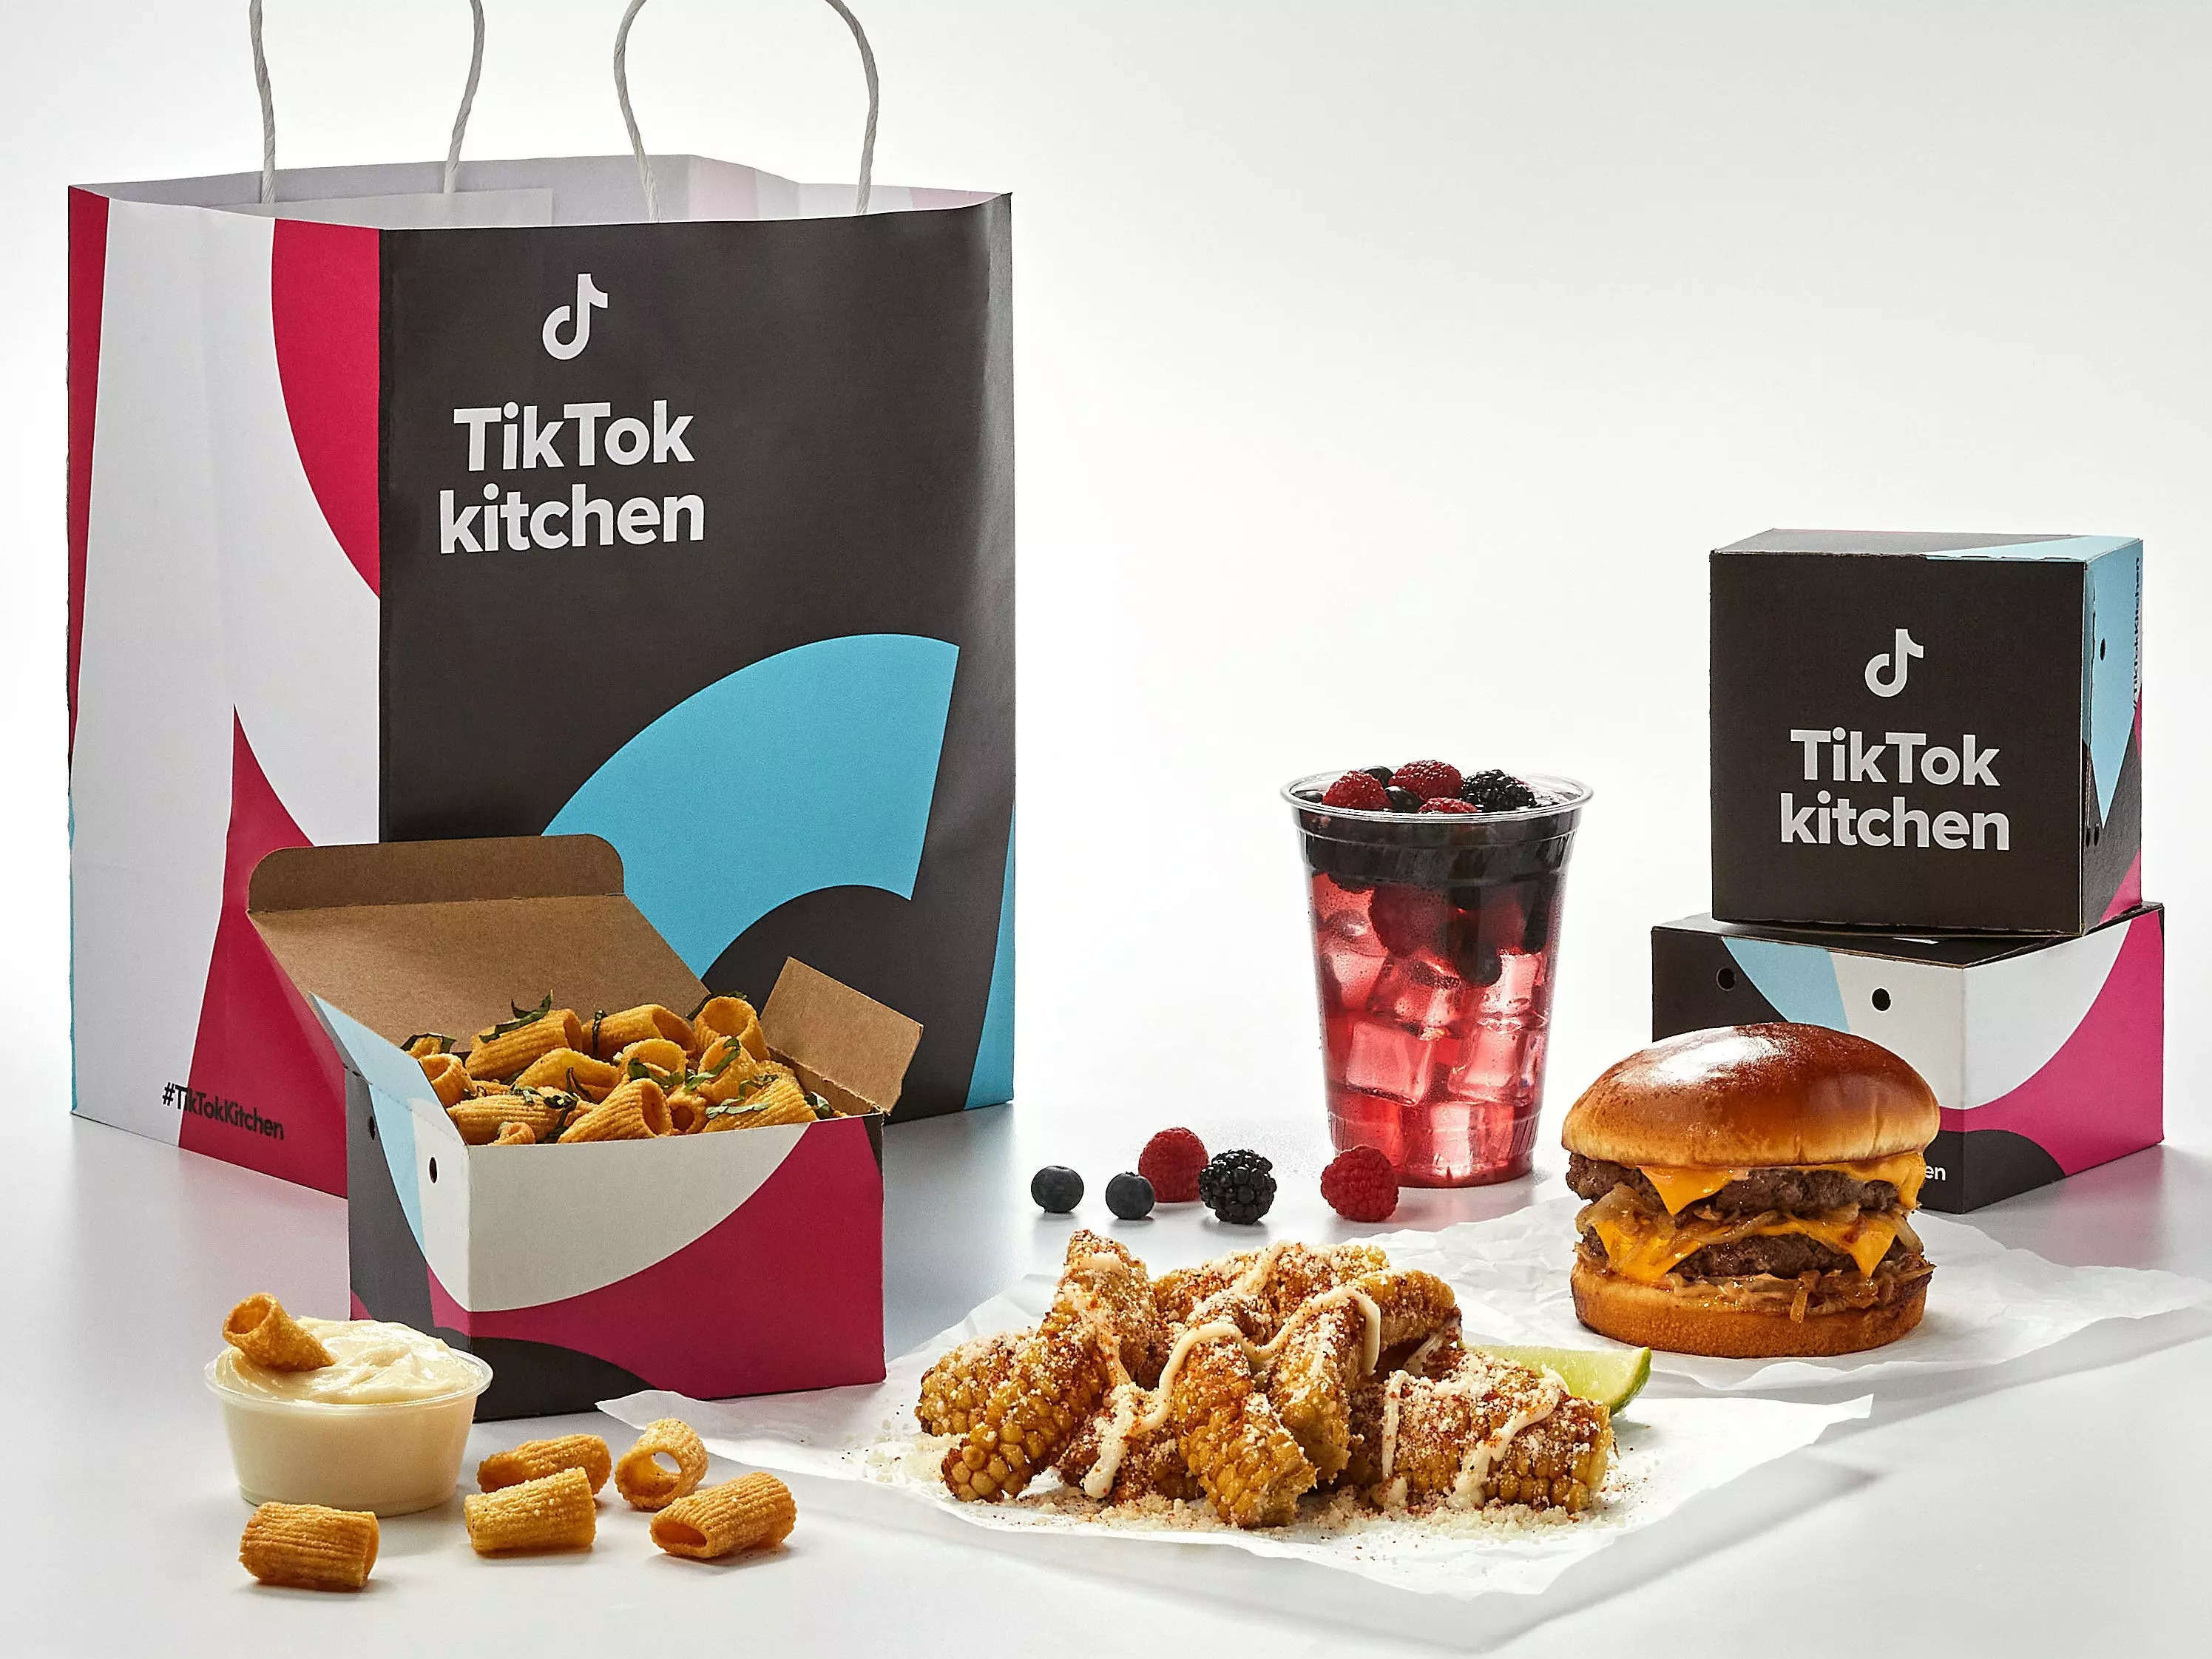 
TikTok is opening 300 restaurants to deliver some of its most viral food trends like feta pasta and corn ribs across the US
